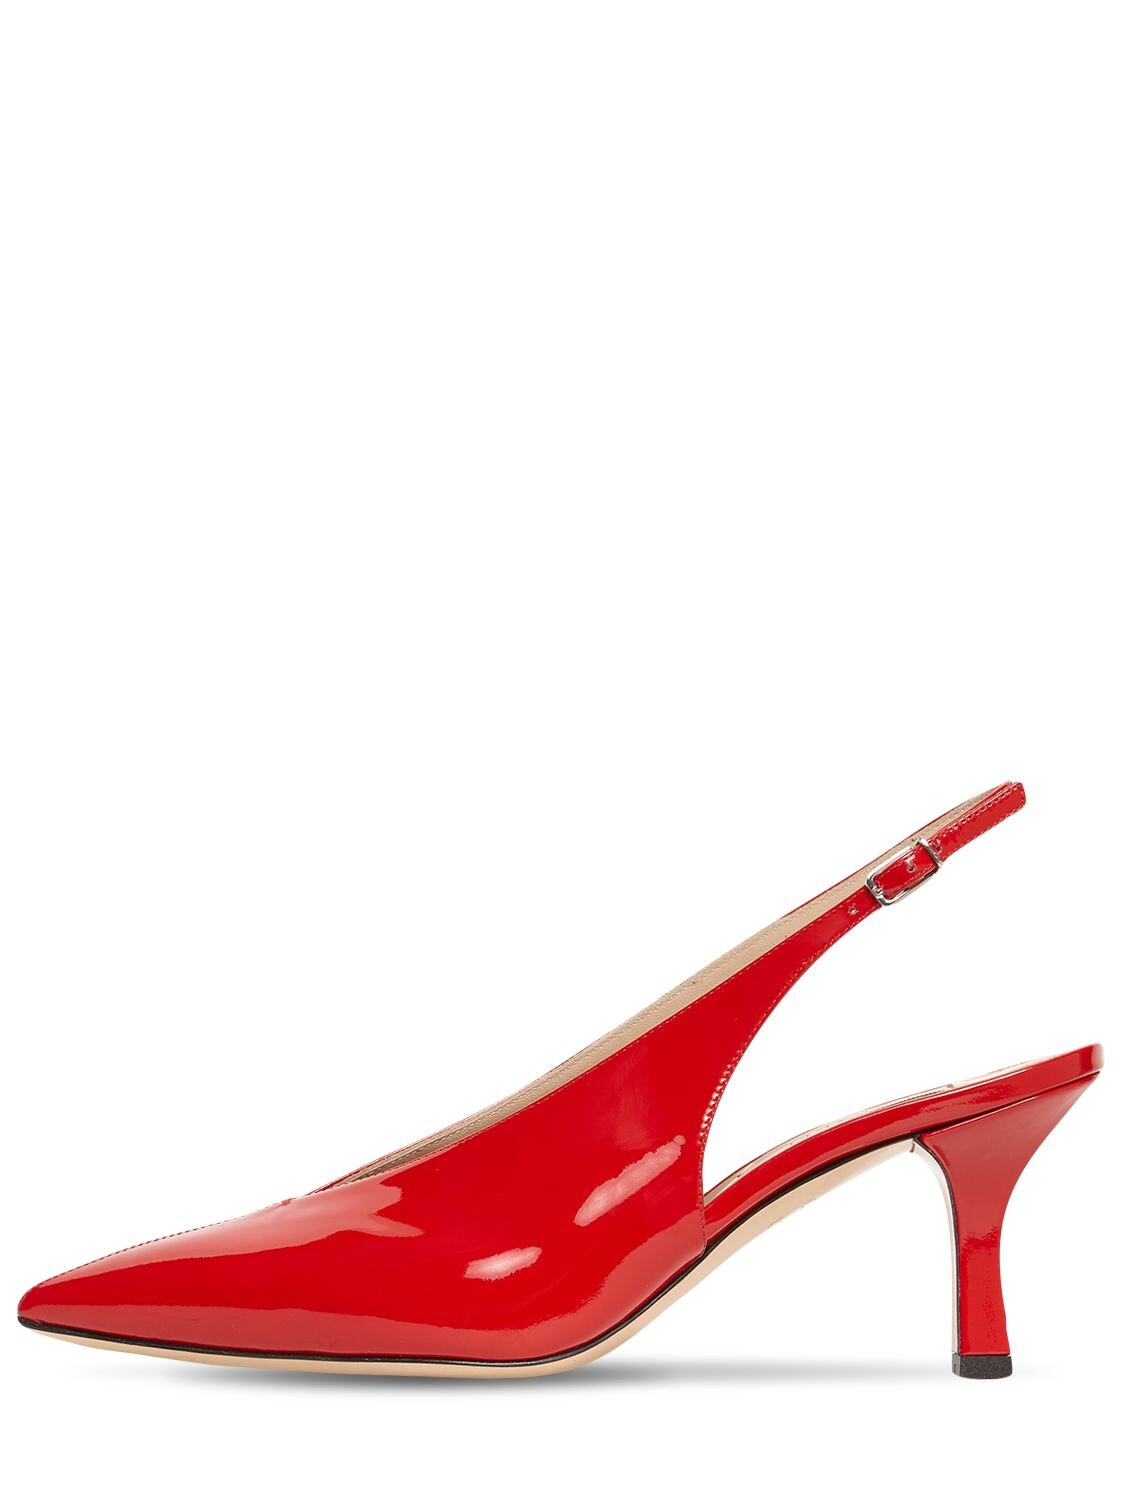 60mm Nico Patent Leather Slingback Pumps